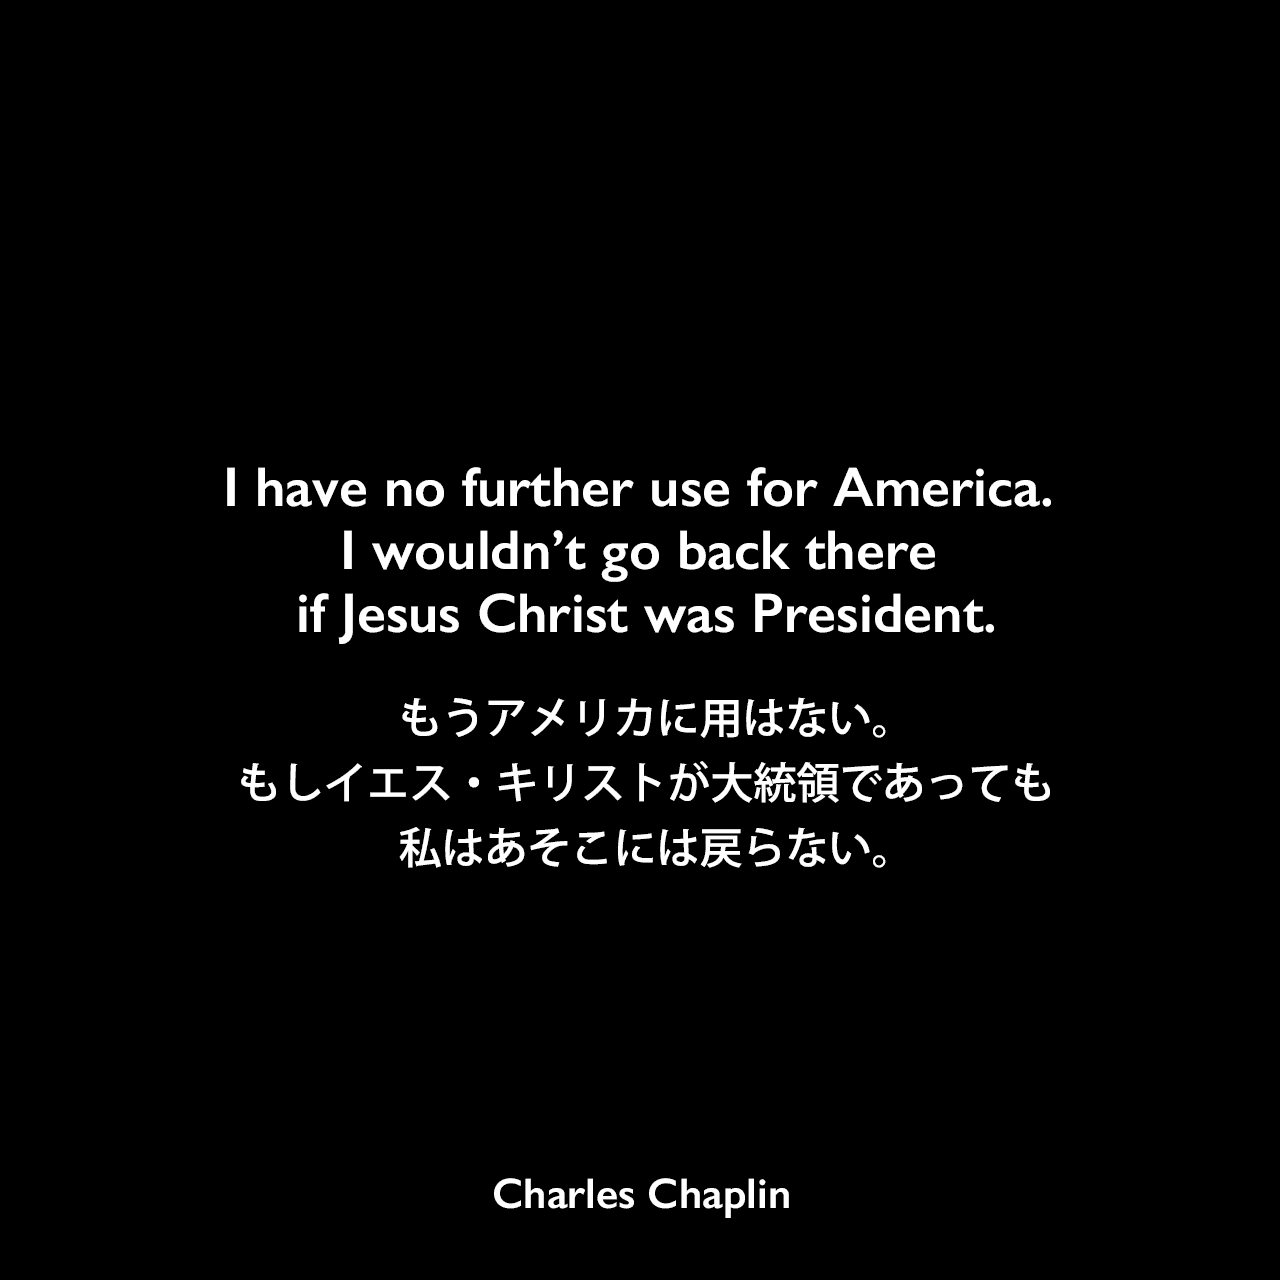 I have no further use for America. I wouldn’t go back there if Jesus Christ was President.もうアメリカに用はない。もしイエス・キリストが大統領であっても、私はあそこには戻らない。Charles Chaplin